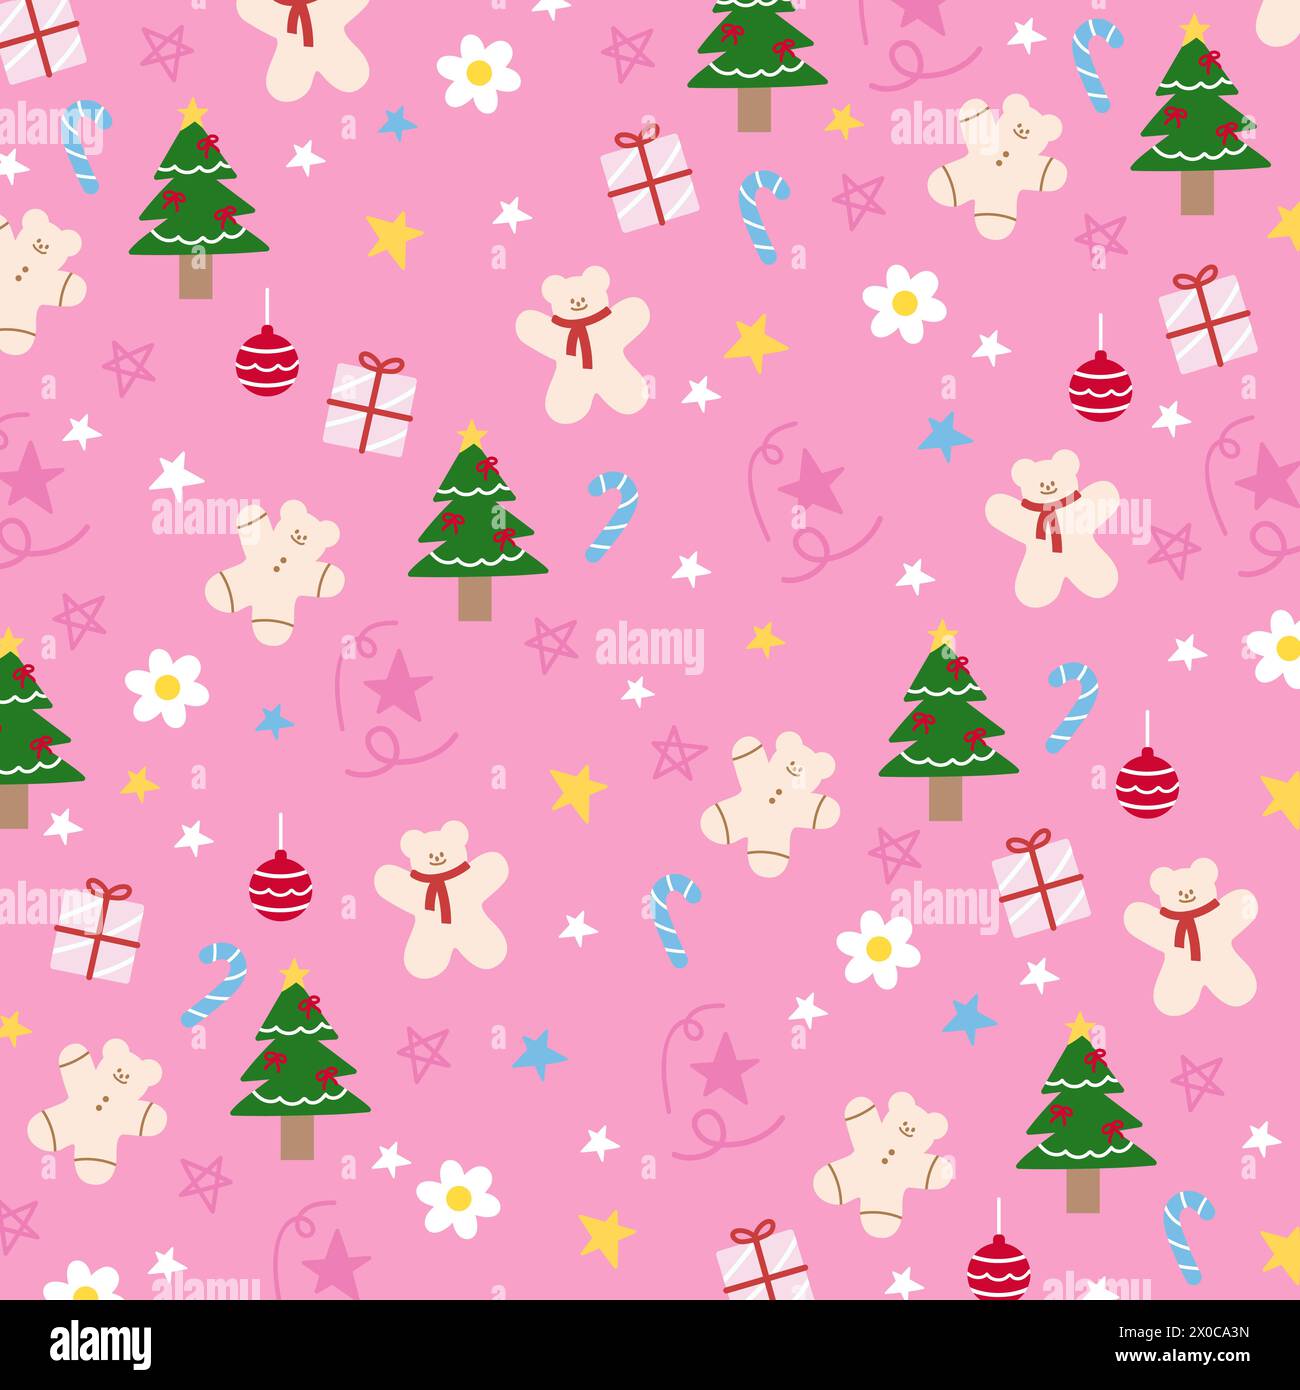 Christmas illustration of Christmas tree, gingerbread man, gift box, candy cane on a pastel pink background for wallpaper, fabric print, pattern Stock Vector